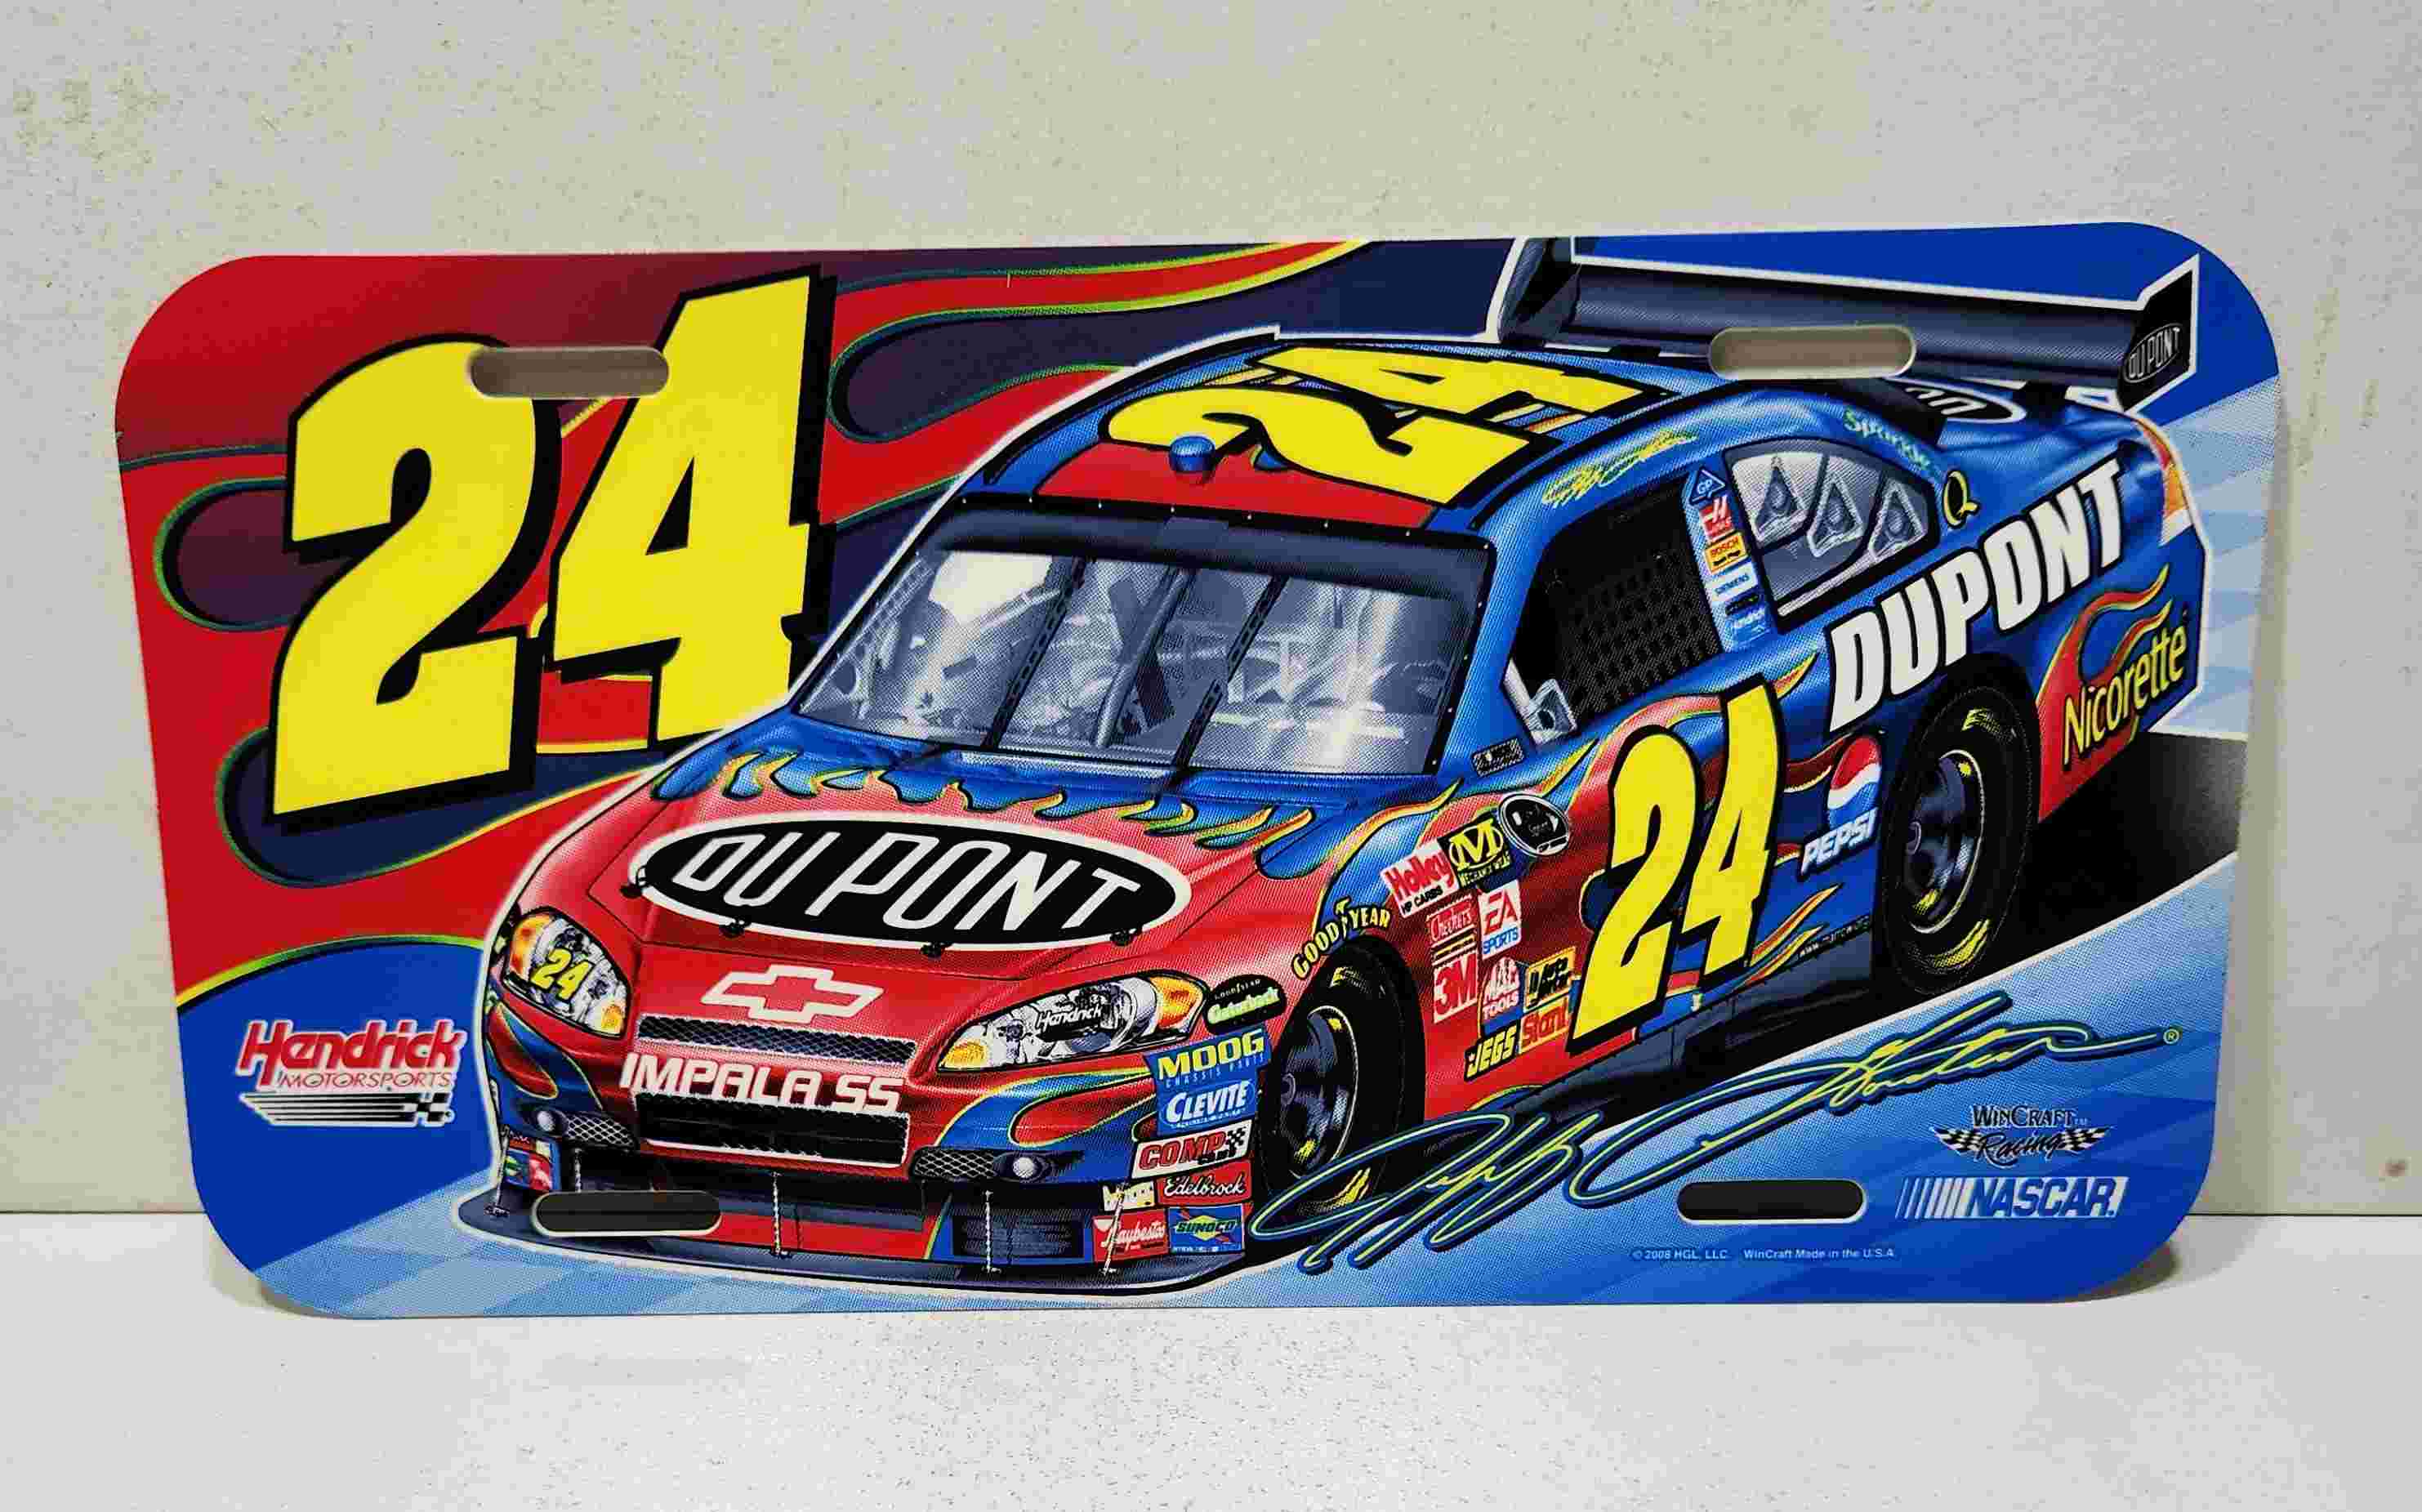 2008 Jeff Gordon Dupont plastic license plate by Wincraft